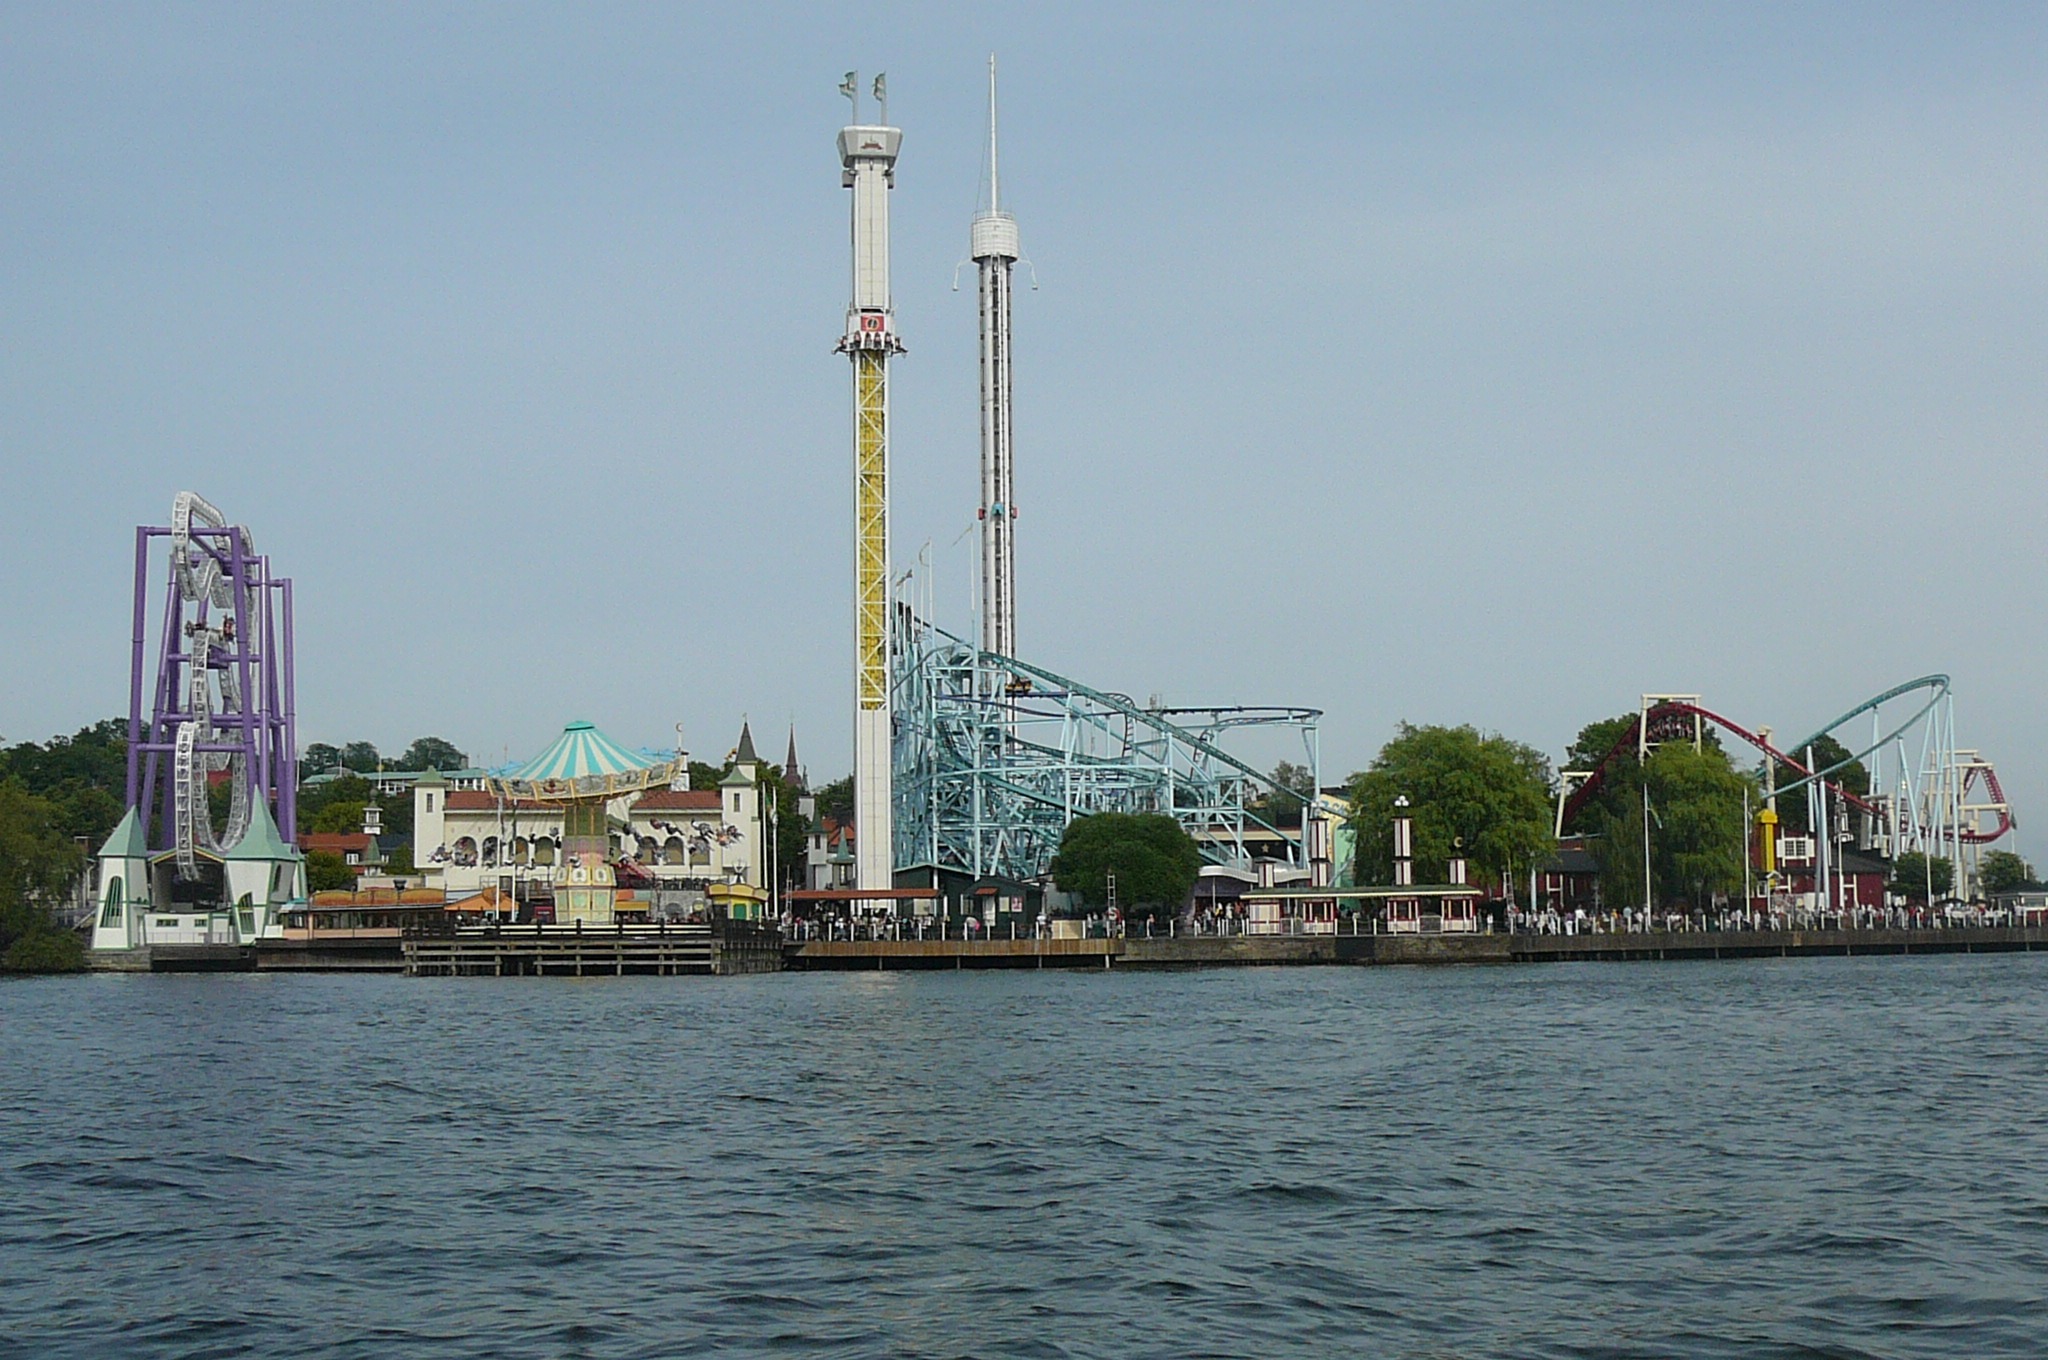 A view of the Grona Lund Amusement Park in Stockholm, Sweden